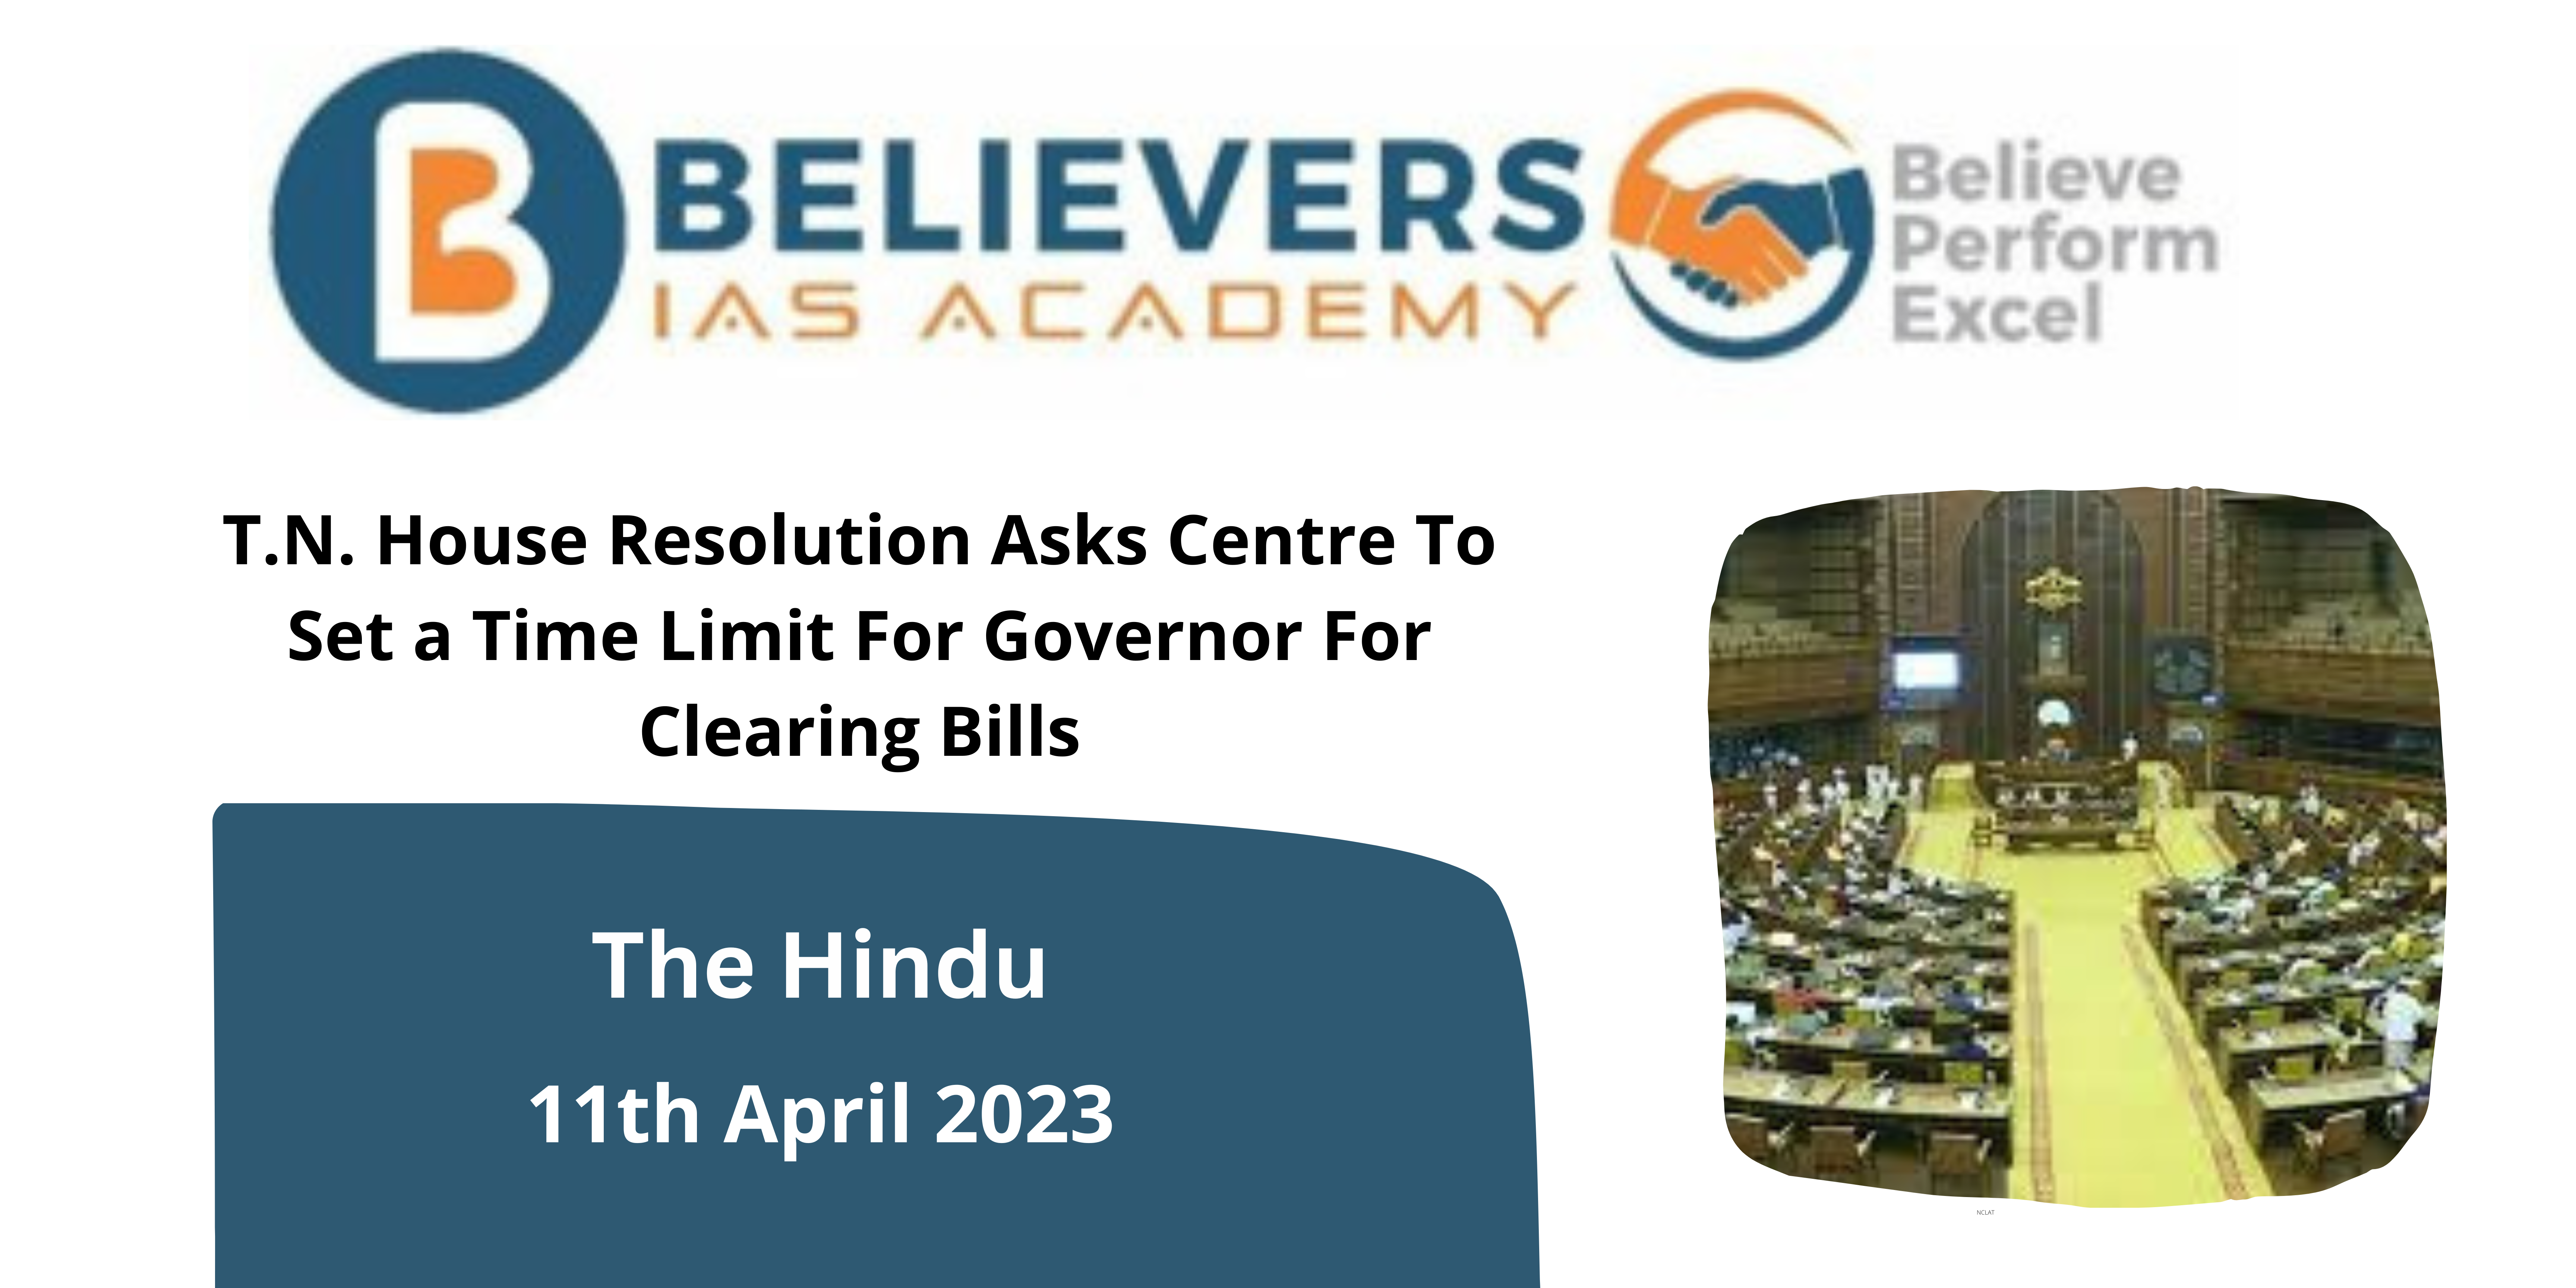 T.N. House Resolution Asks Centre To Set a Time Limit For Governor For Clearing Bills